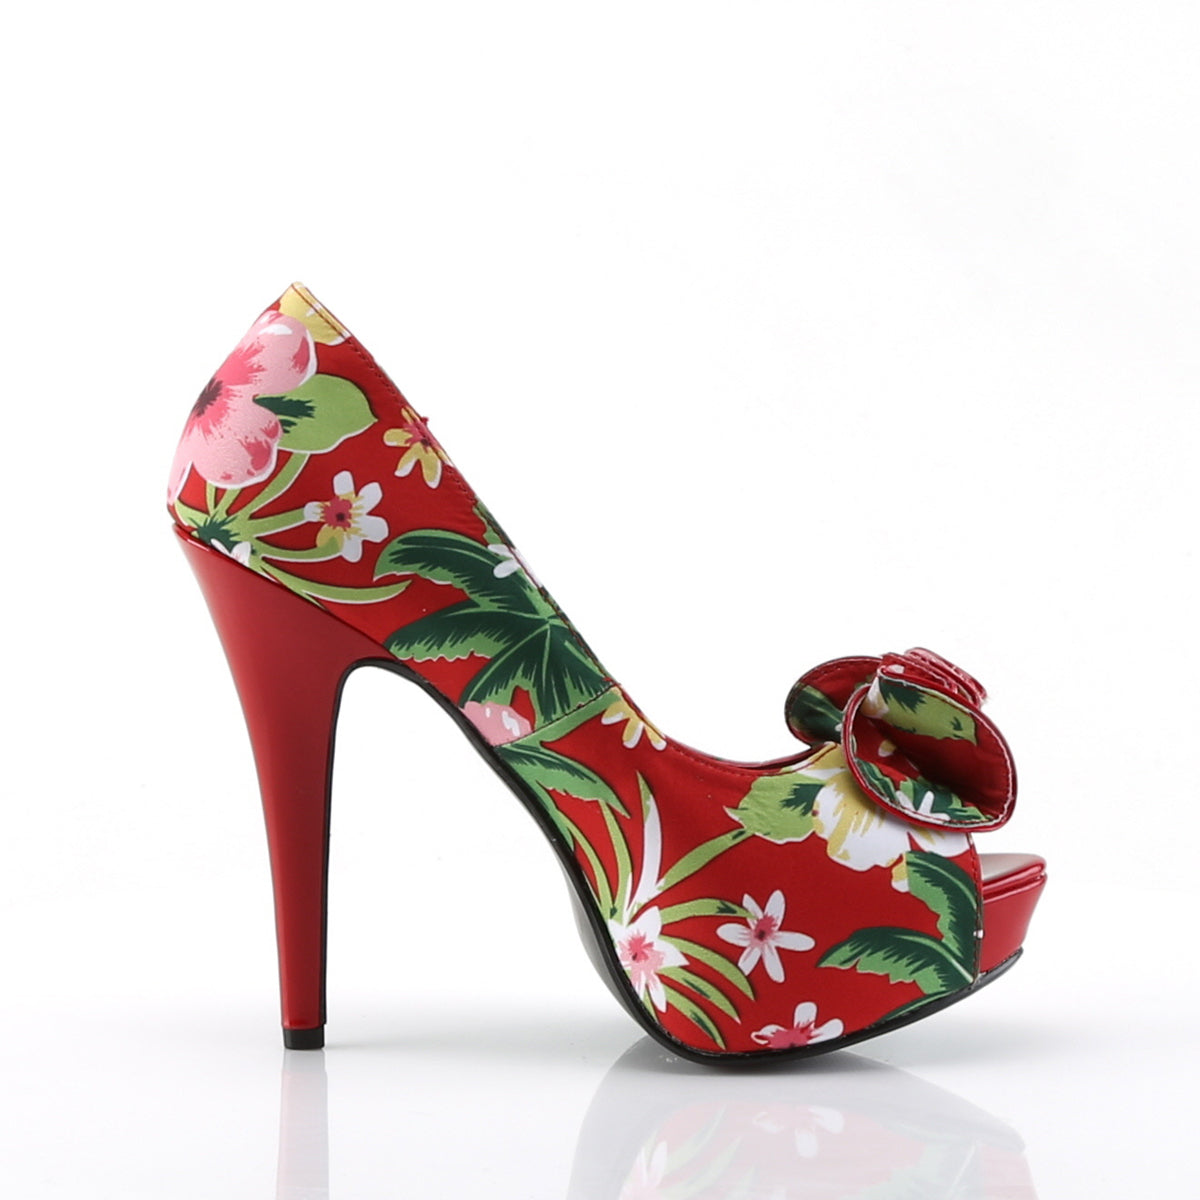 LOLITA-11 Pin Up 5" Heel Red Floral Retro Pin Up Shoes-Pin Up Couture- Sexy Shoes Fetish Heels